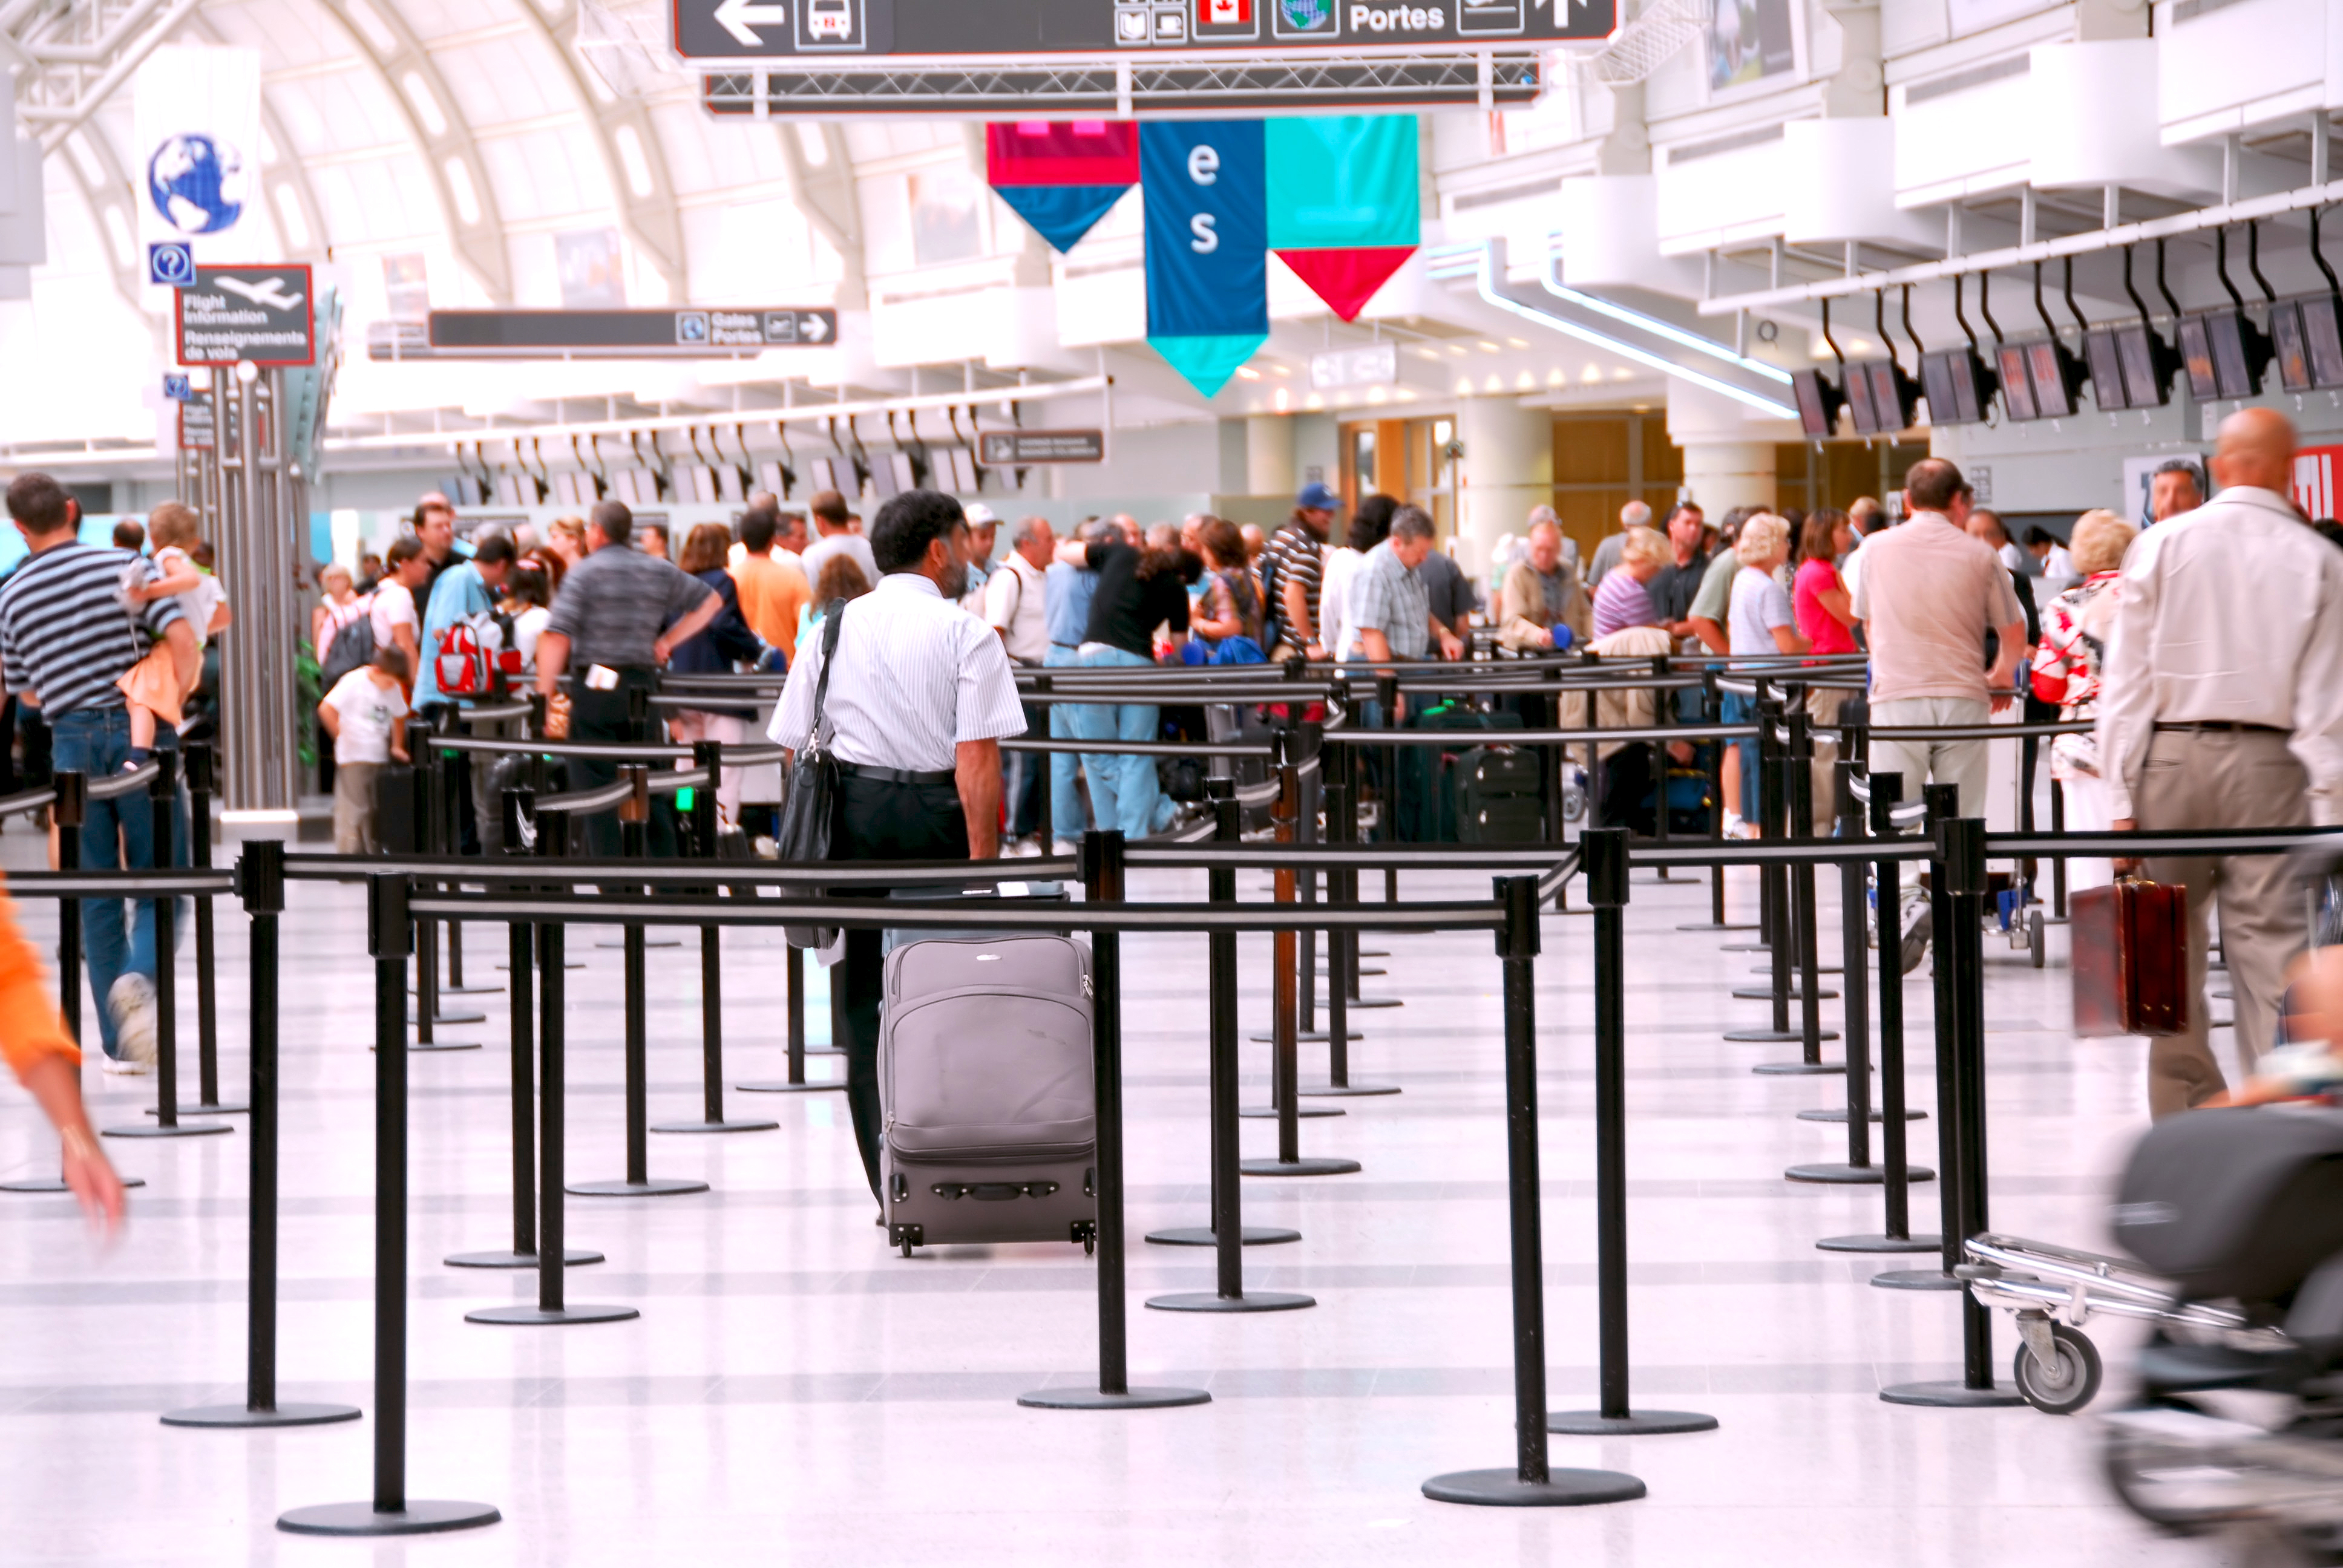 How to Go Through Airport Lines Quickly - Airport Crowd